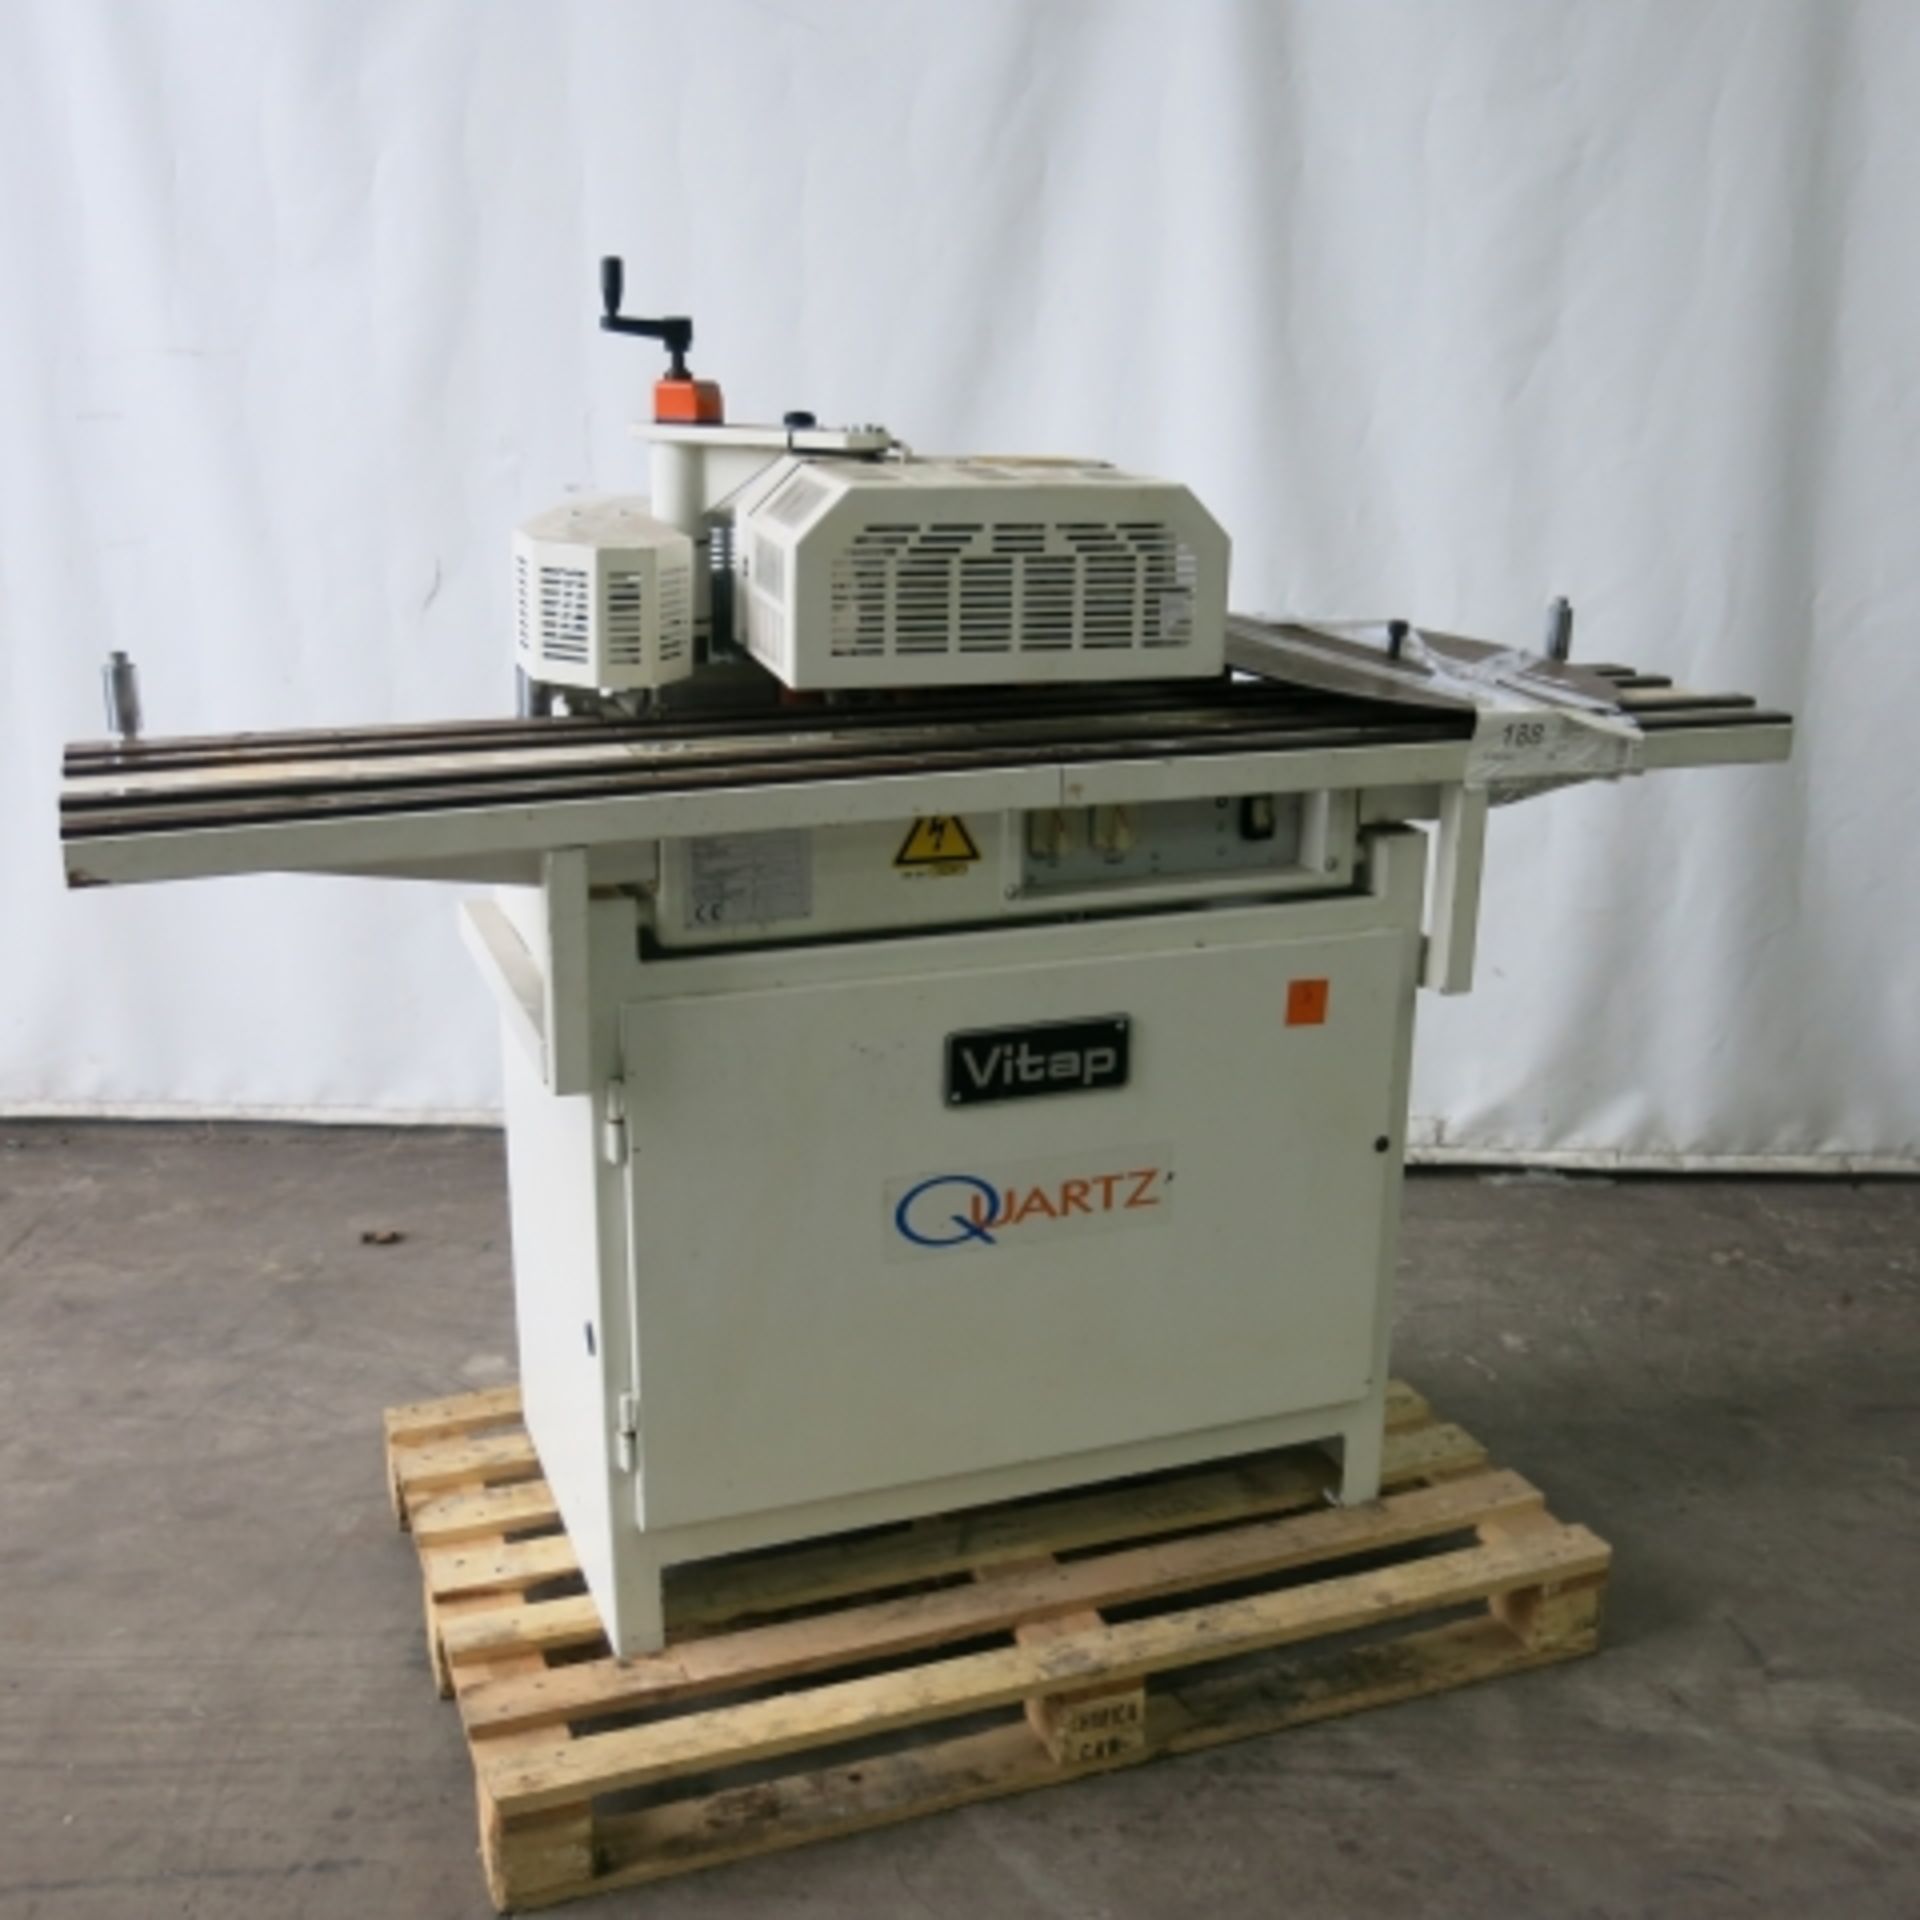 2001 Vitap Quartz Edge Bander for pre-glued tapes from 0.4mm to 1.2mm; with automatic panel feeding;